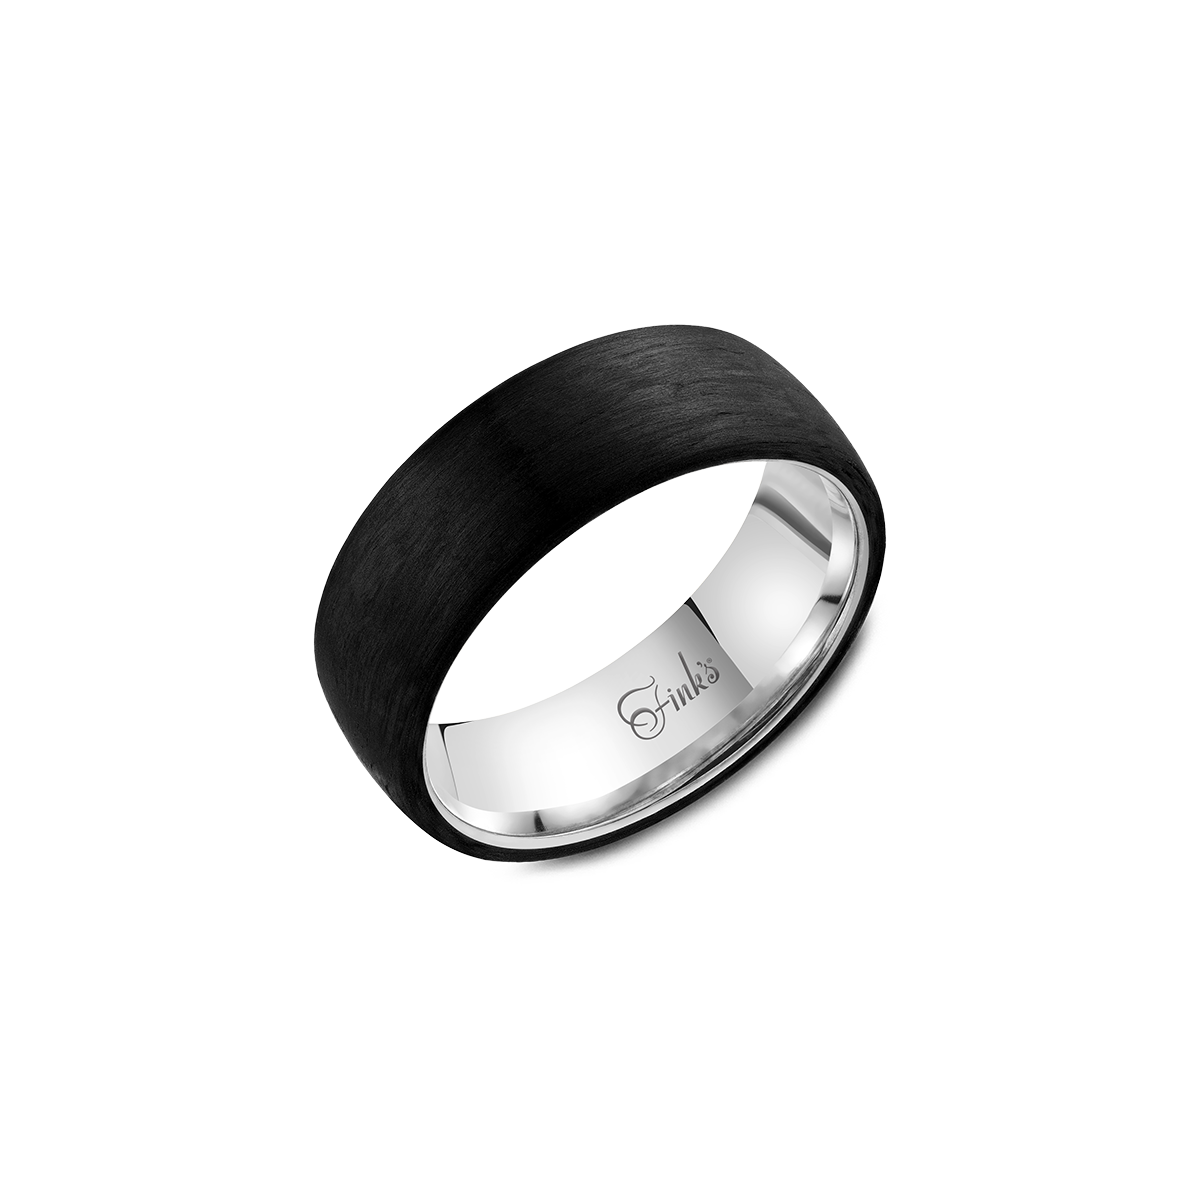 Fink's White Gold and Forged Carbon Fiber Wedding Band